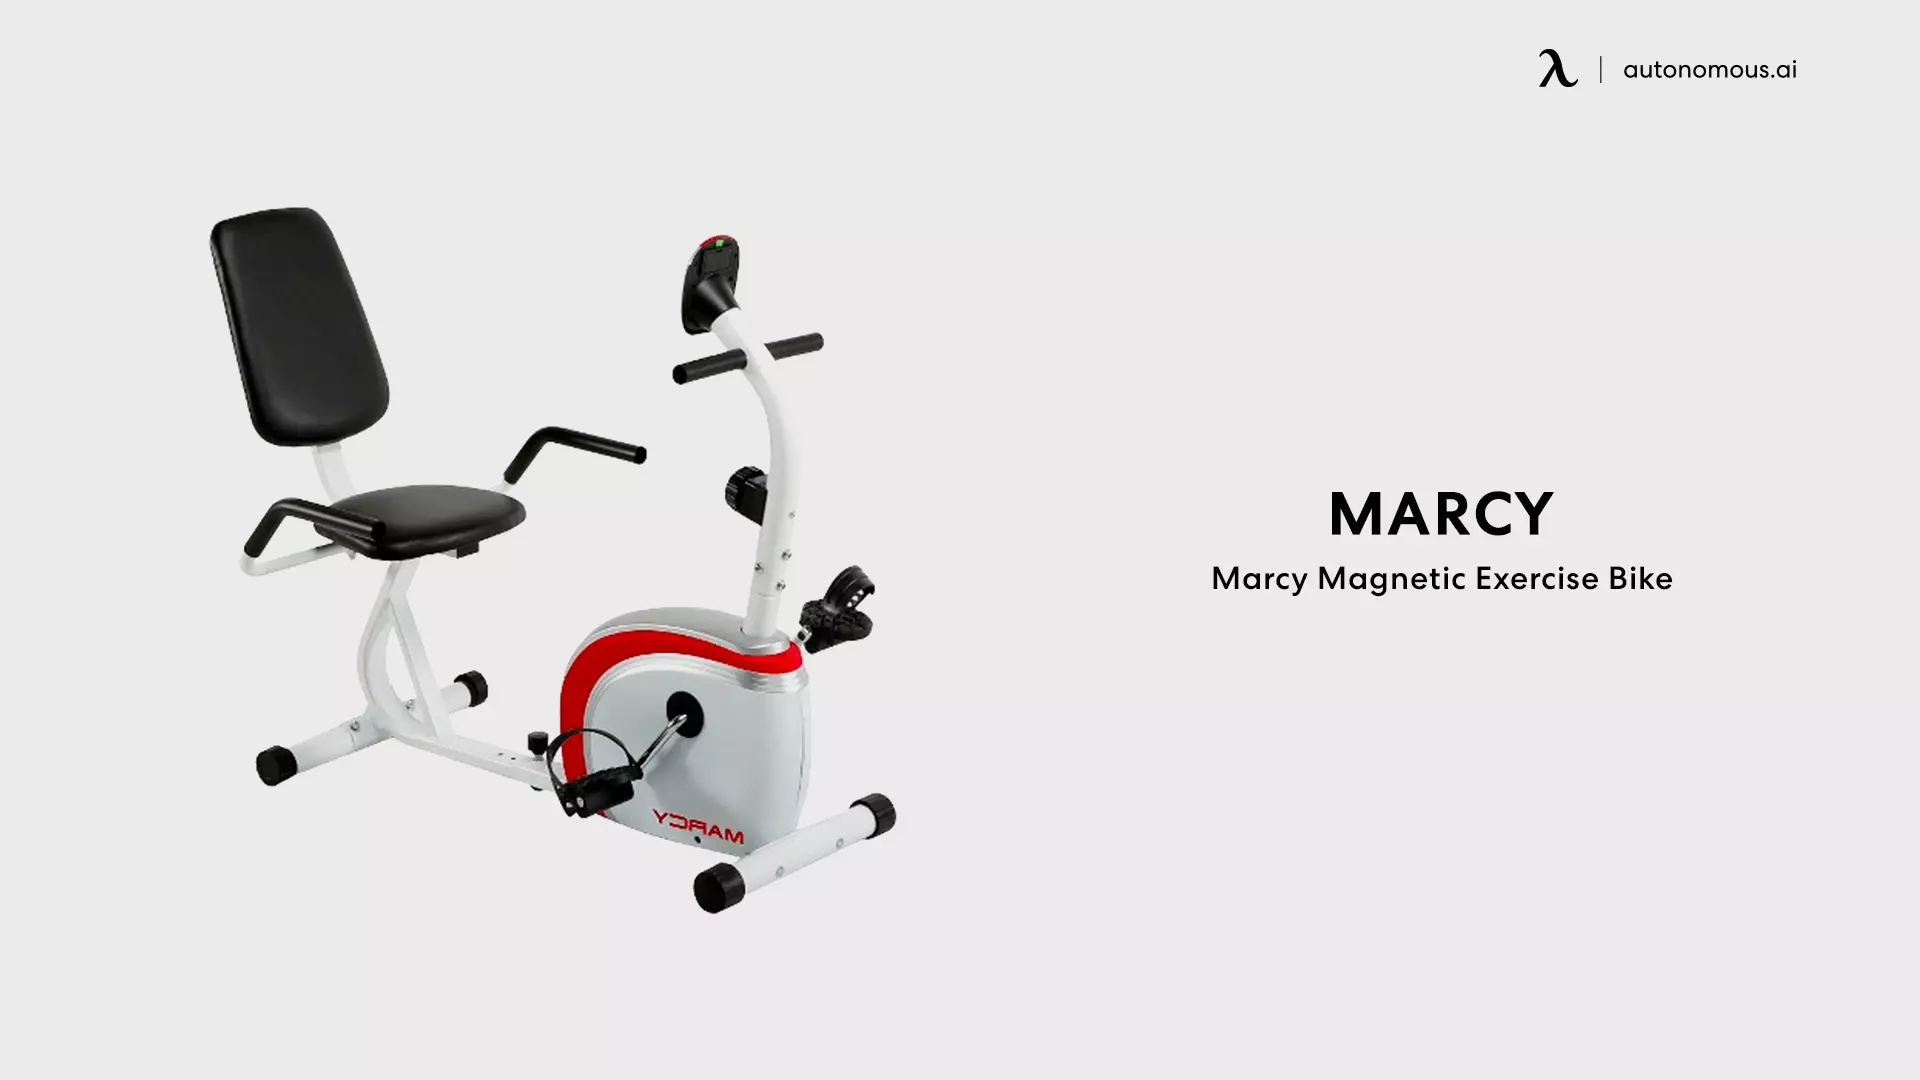 Marcy Magnetic Exercise Bike